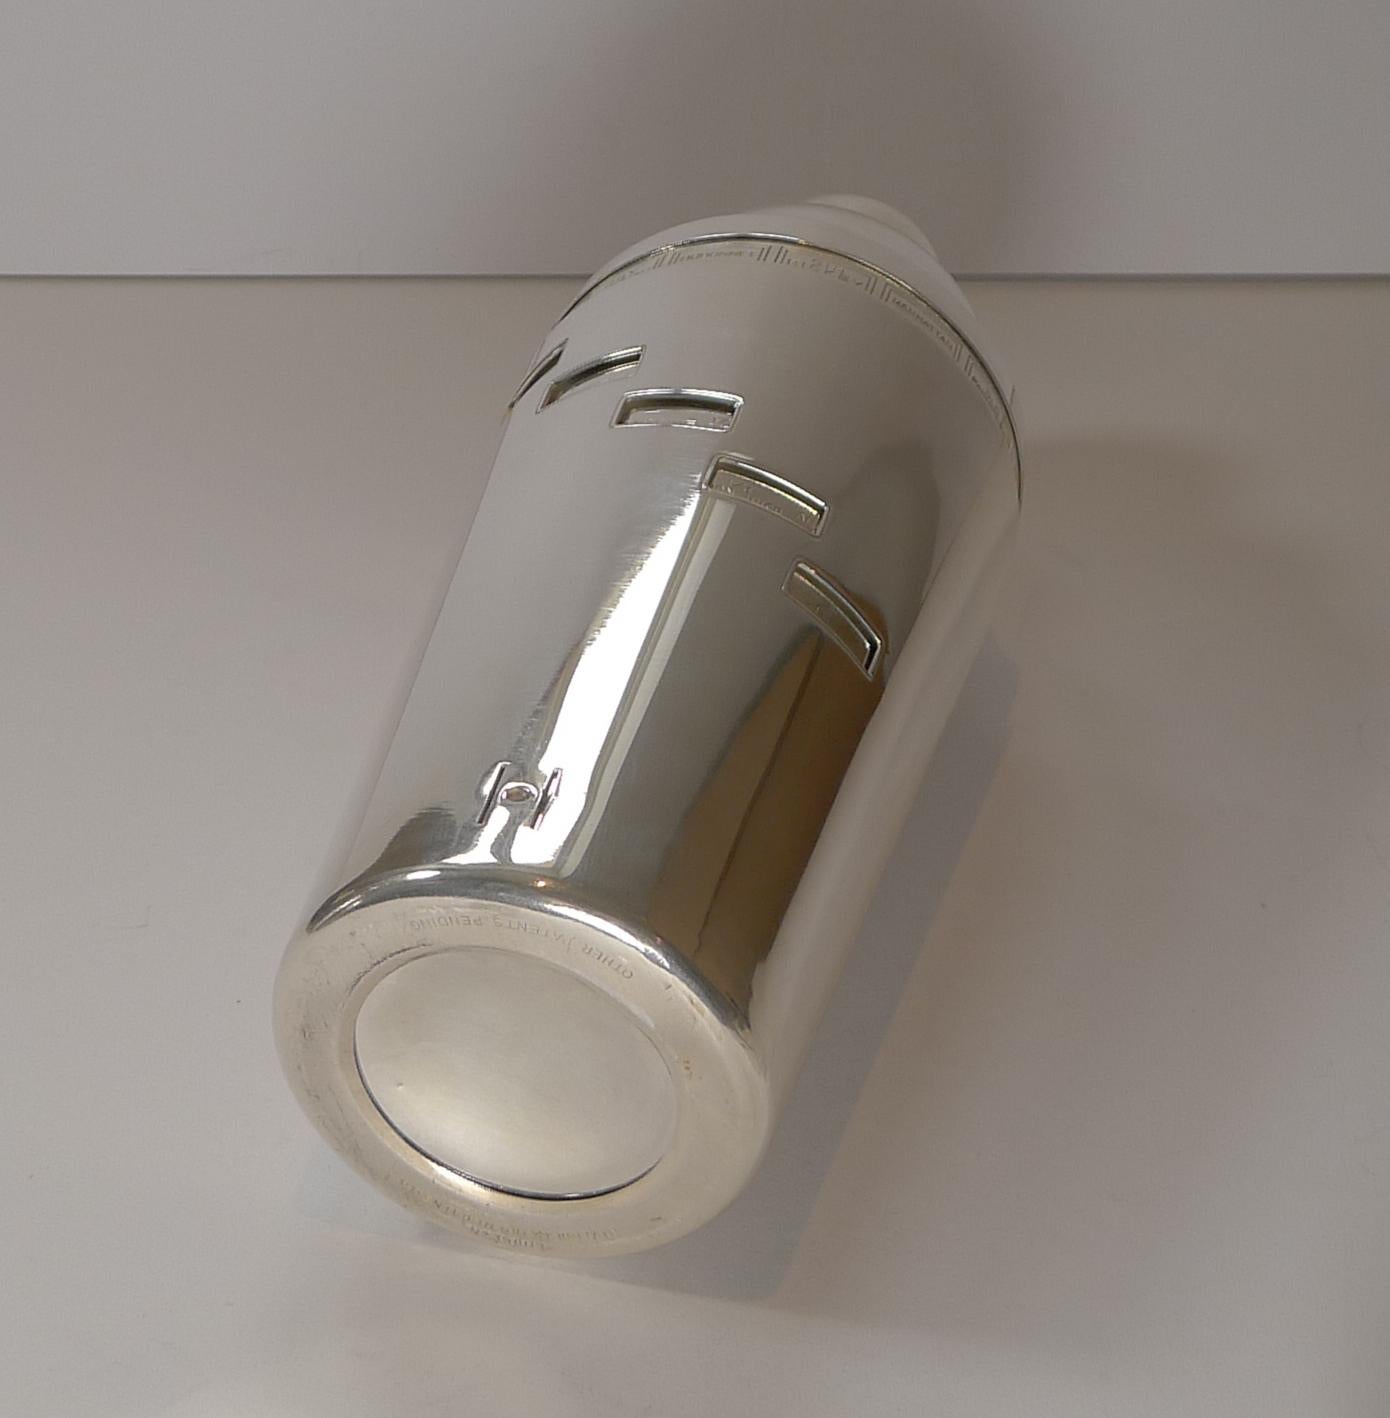 Mid-20th Century English Art Deco Silver Plated Novelty Recipe Cocktail Shaker, c.1930